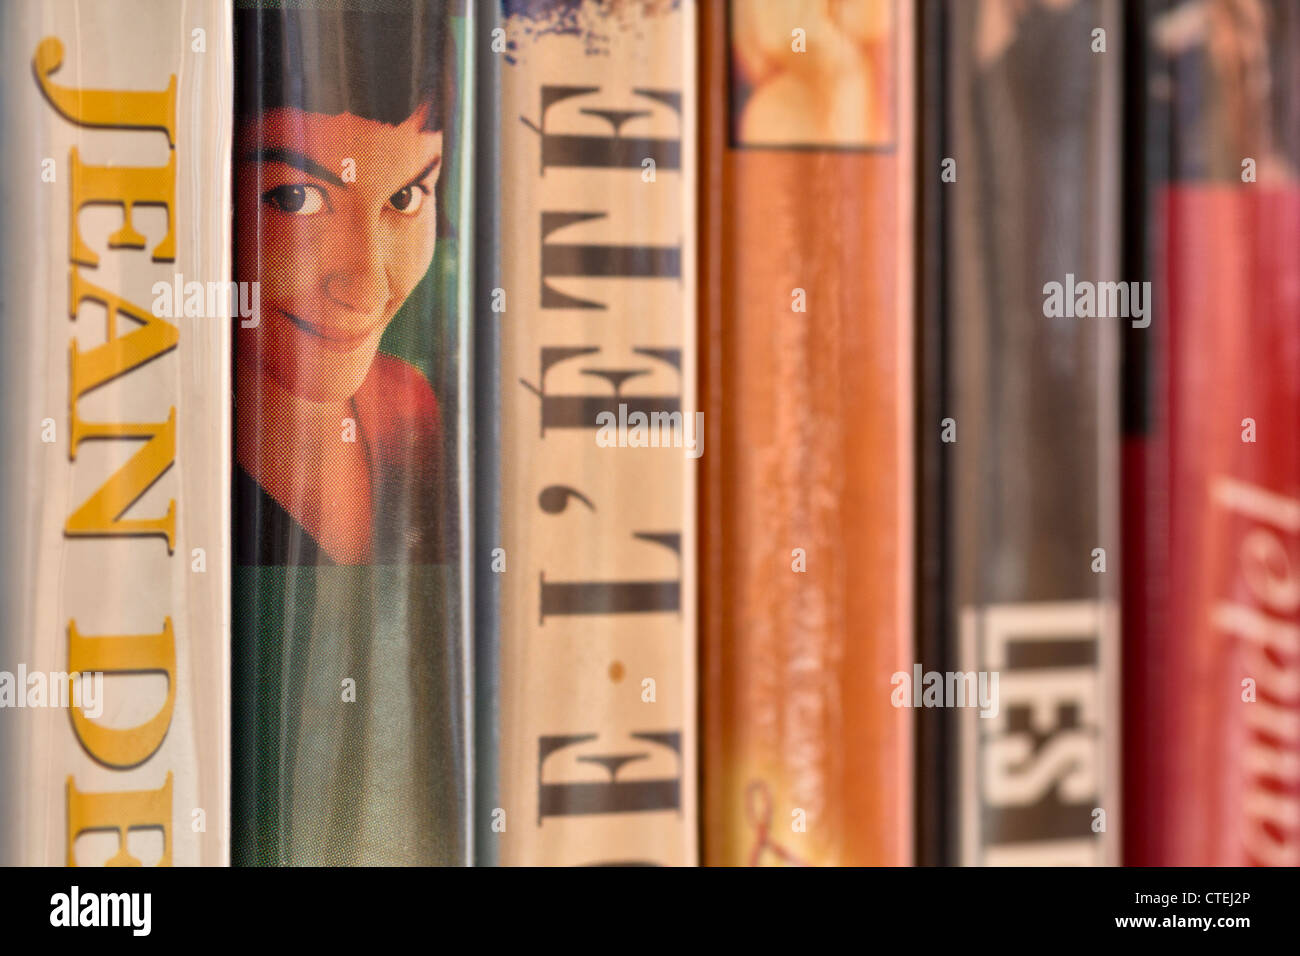 A row of French DVD films Stock Photo